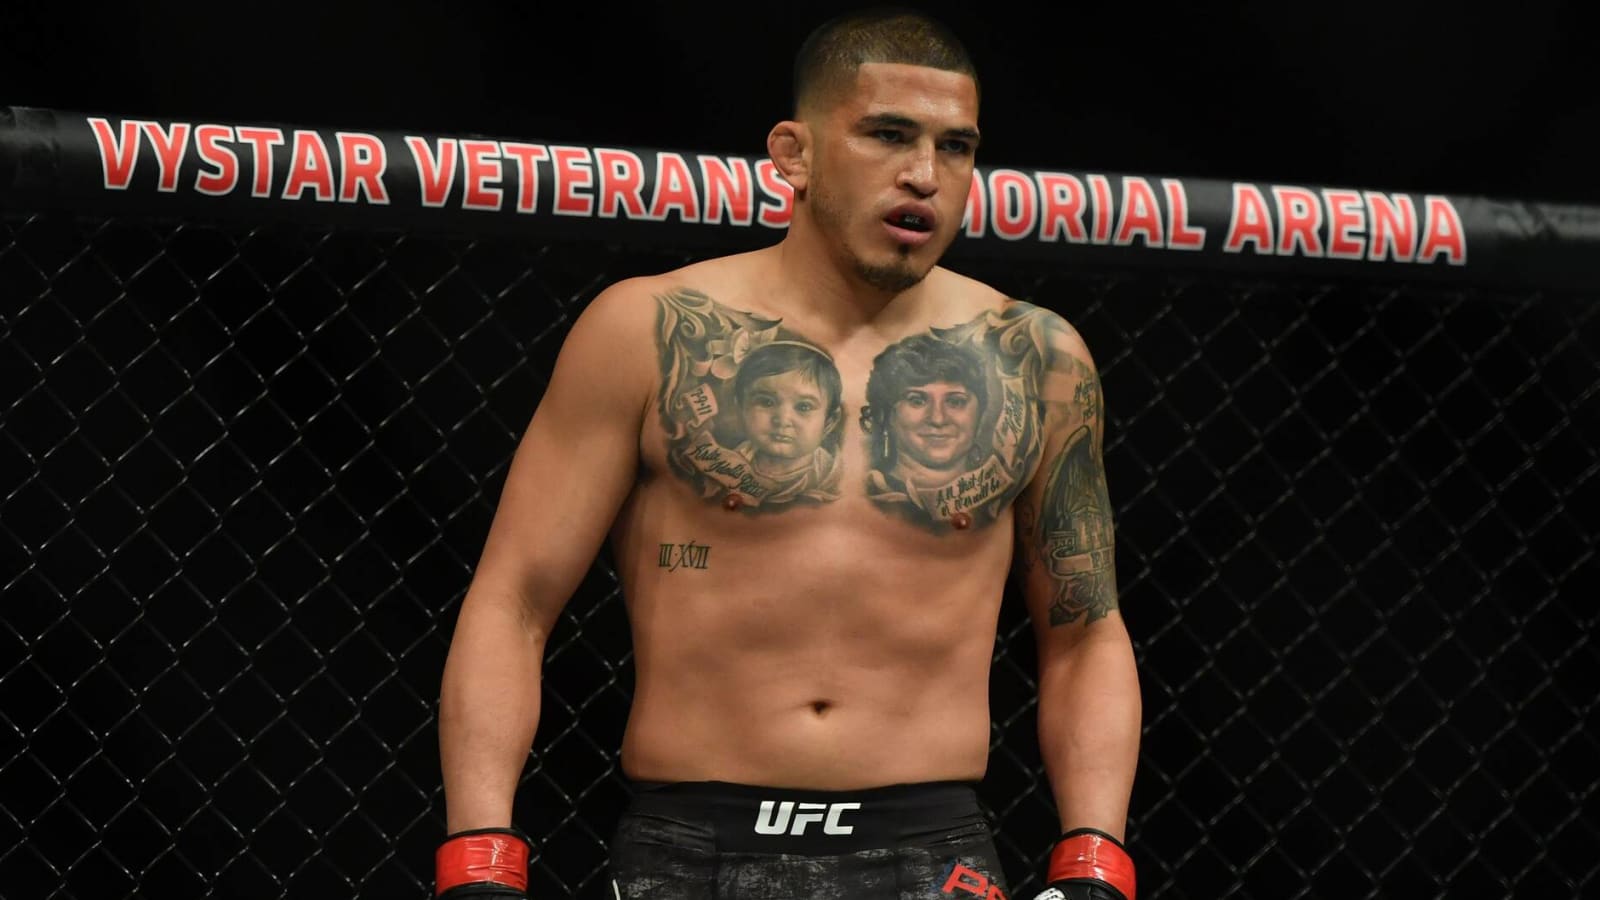 Ray confident he has mental edge in rematch with Pettis